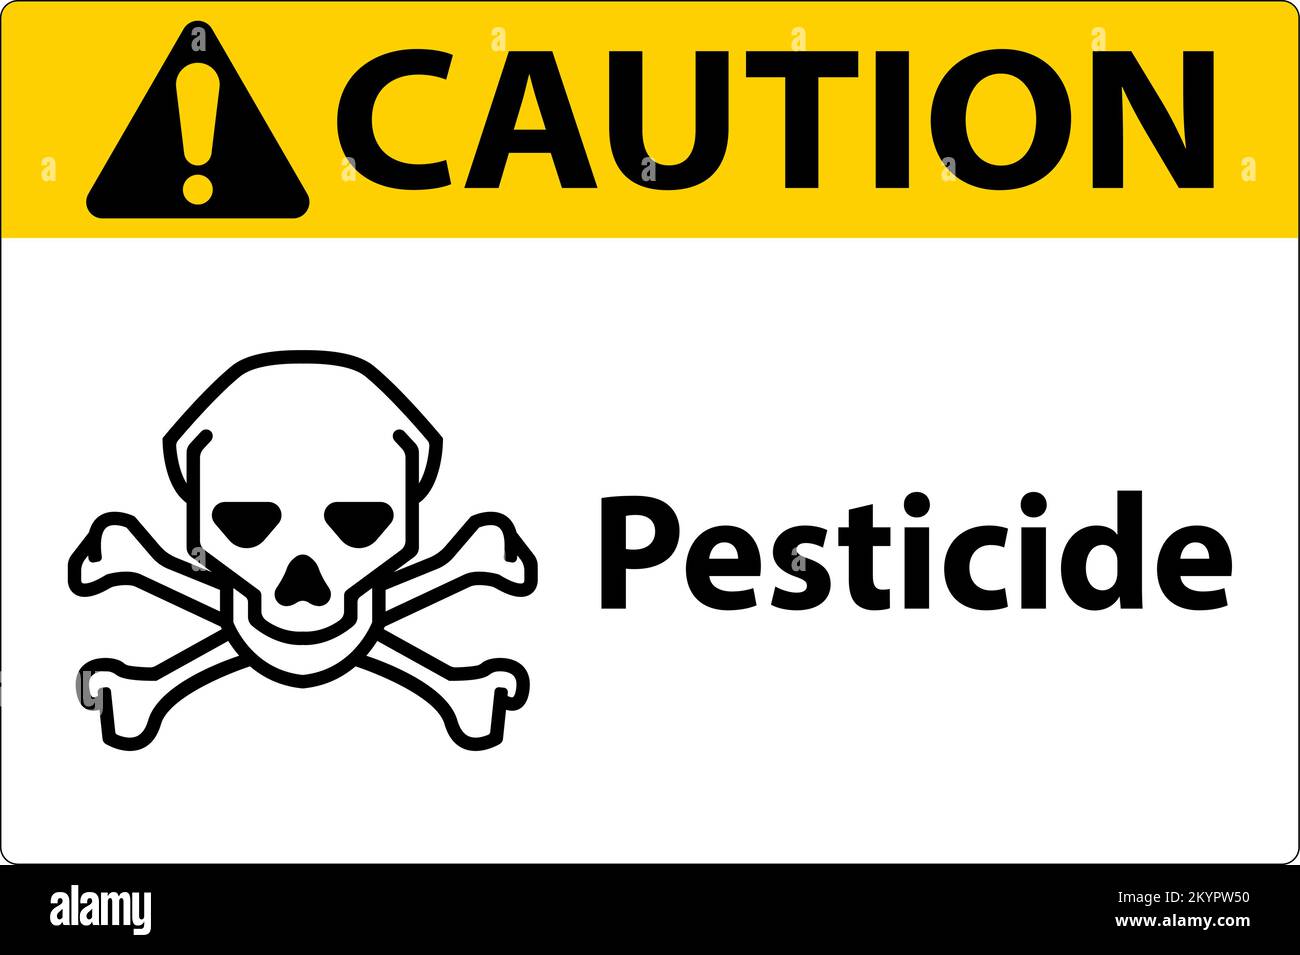 Caution Pesticide Symbol Sign On White Background Stock Vector